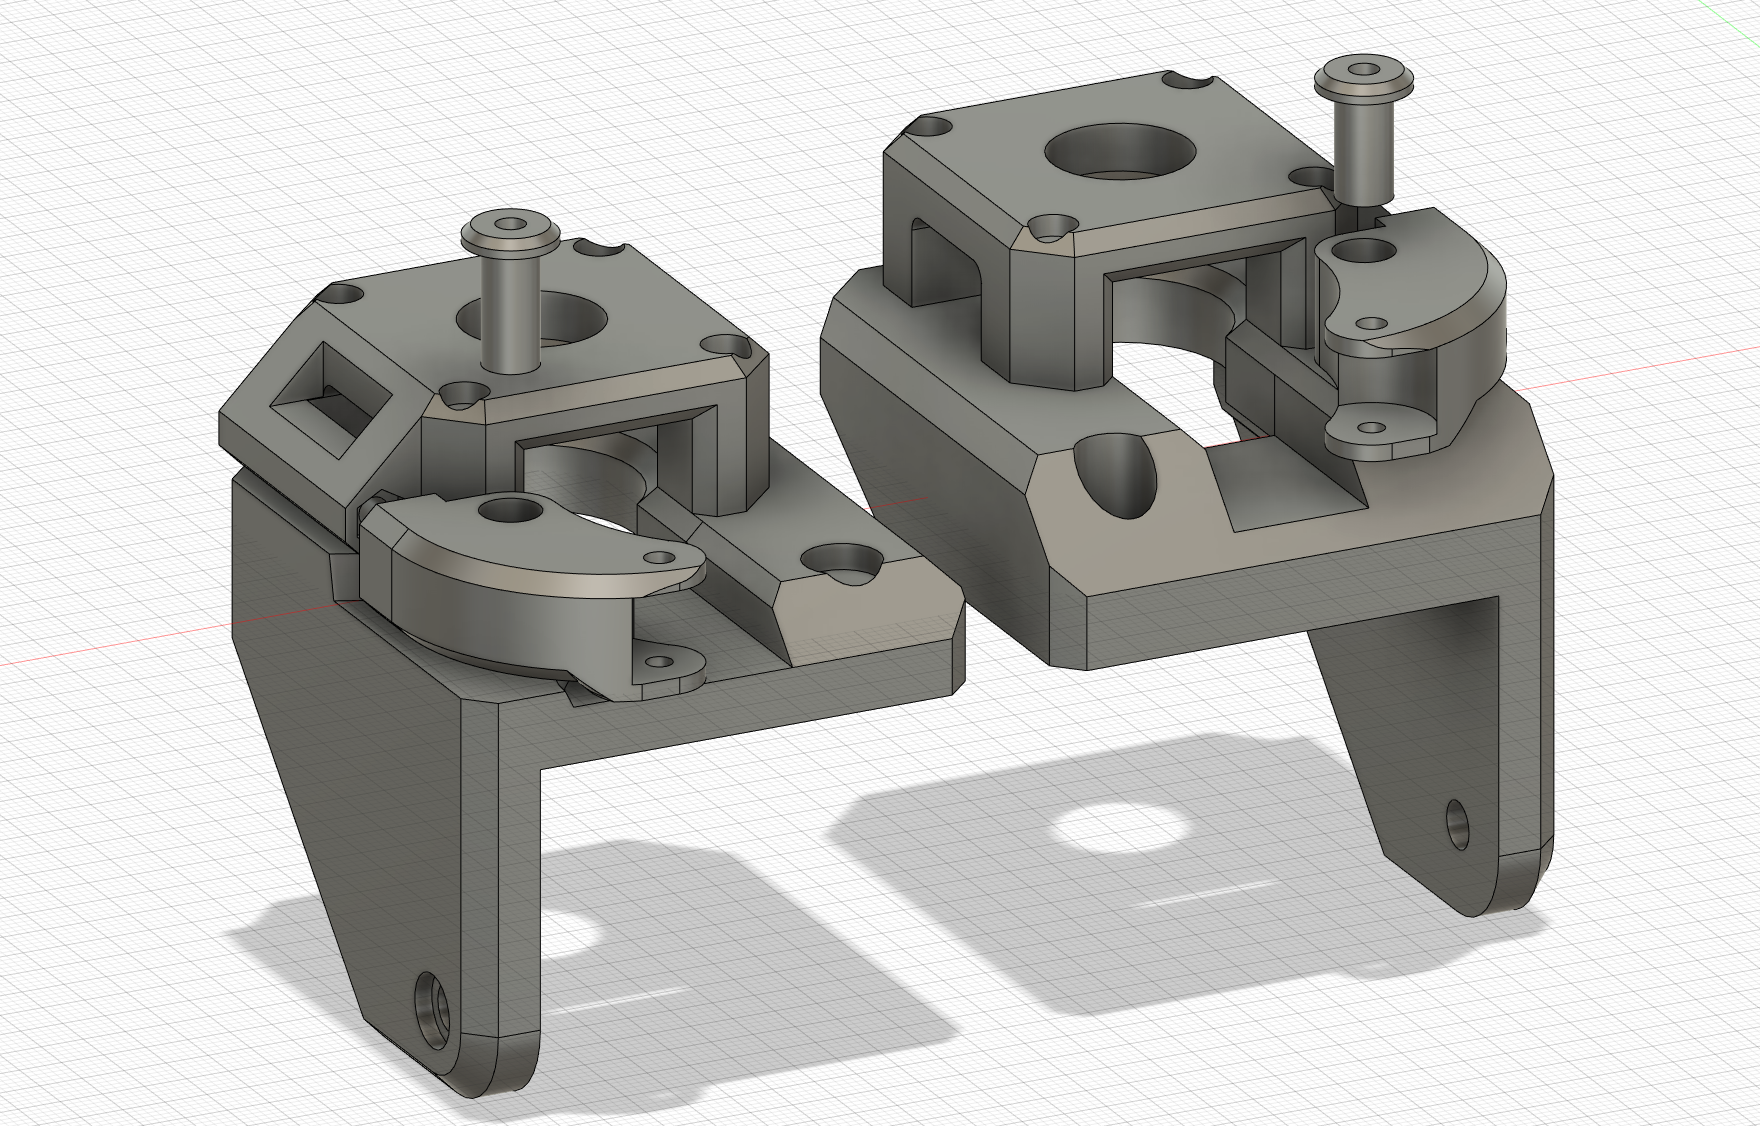 Overkill series X and Y motor mounts for Tronxy X5SA Pro